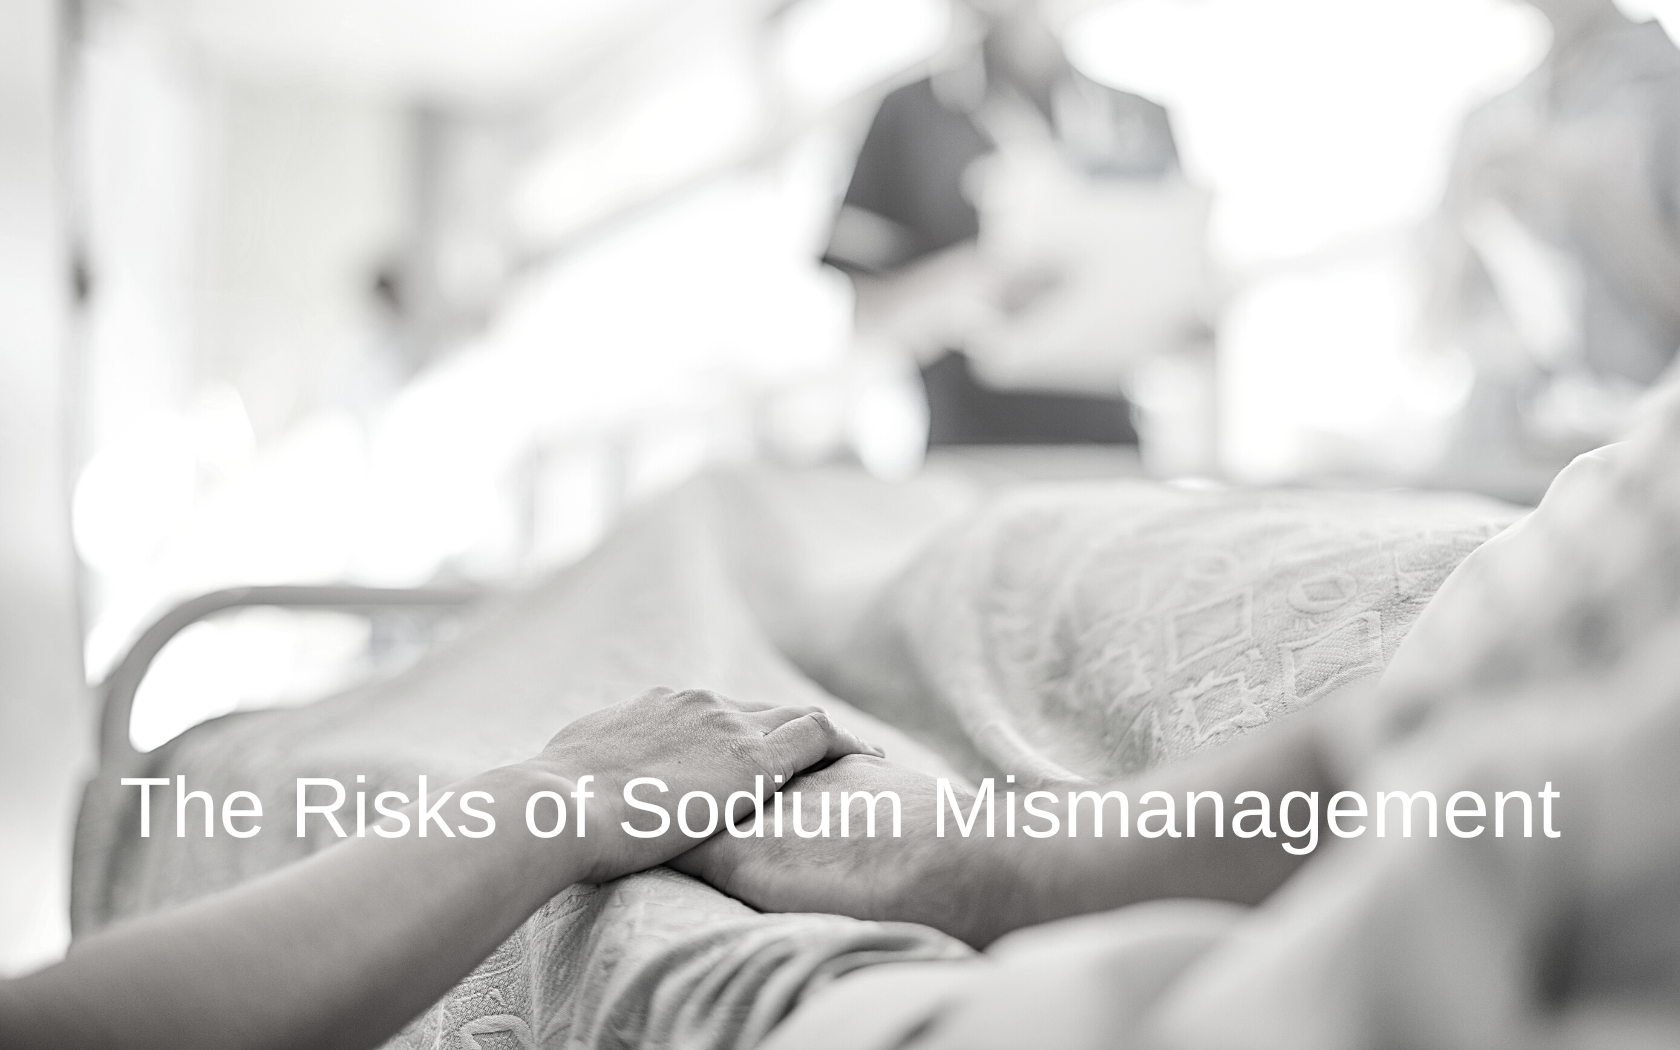 Patient in critical condition because of sodium mismanagement.